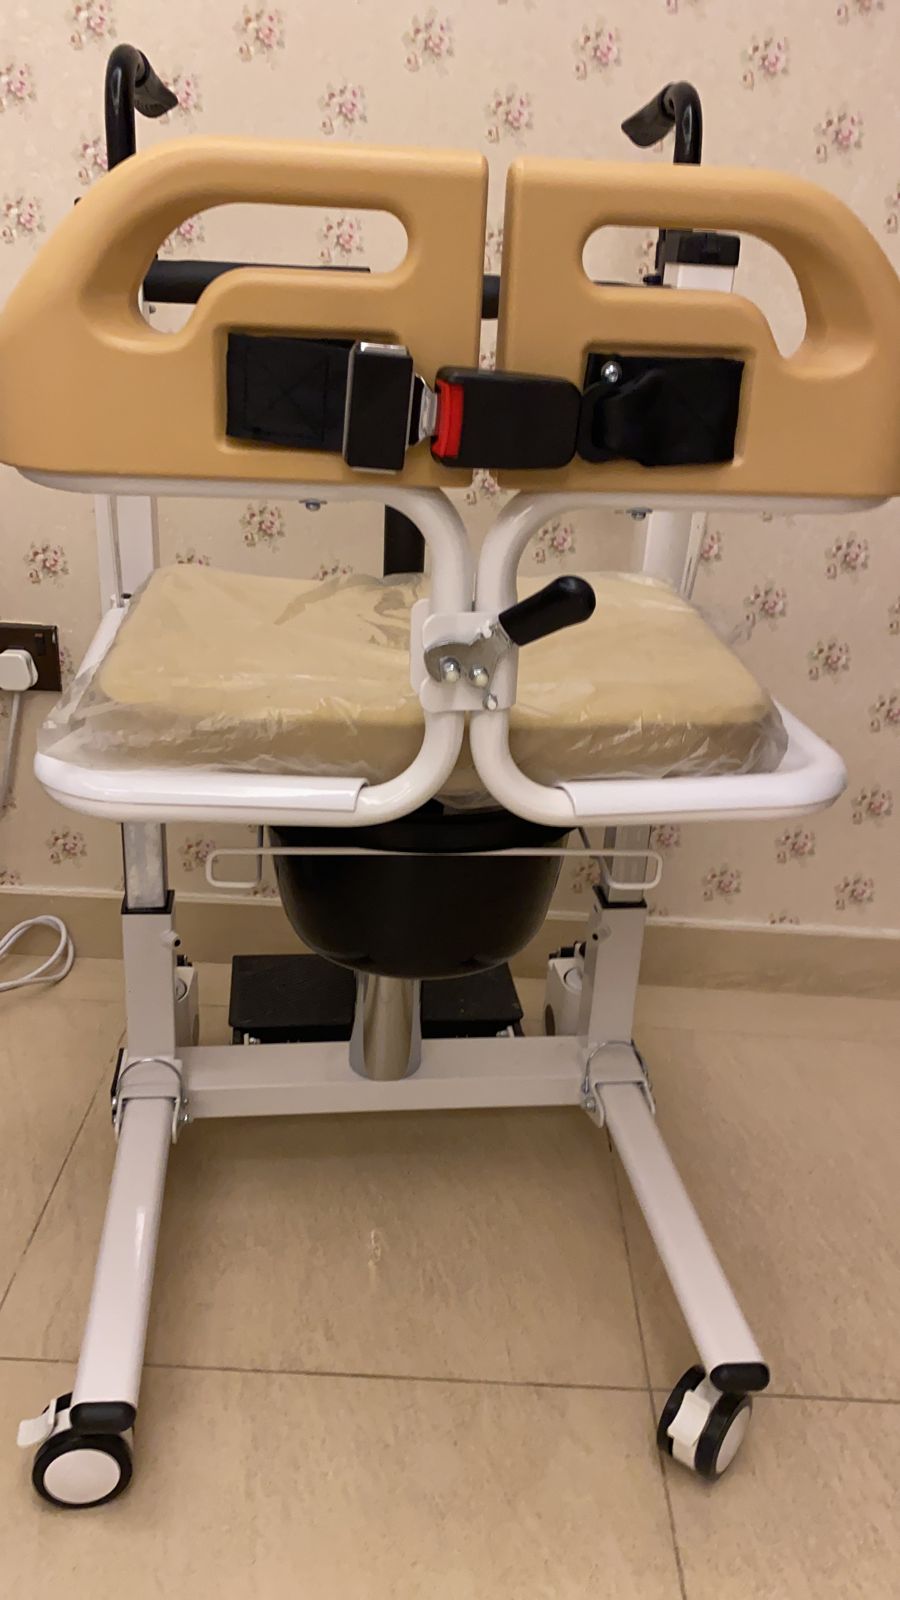 HYDRAULIC PATIENT CHAIR